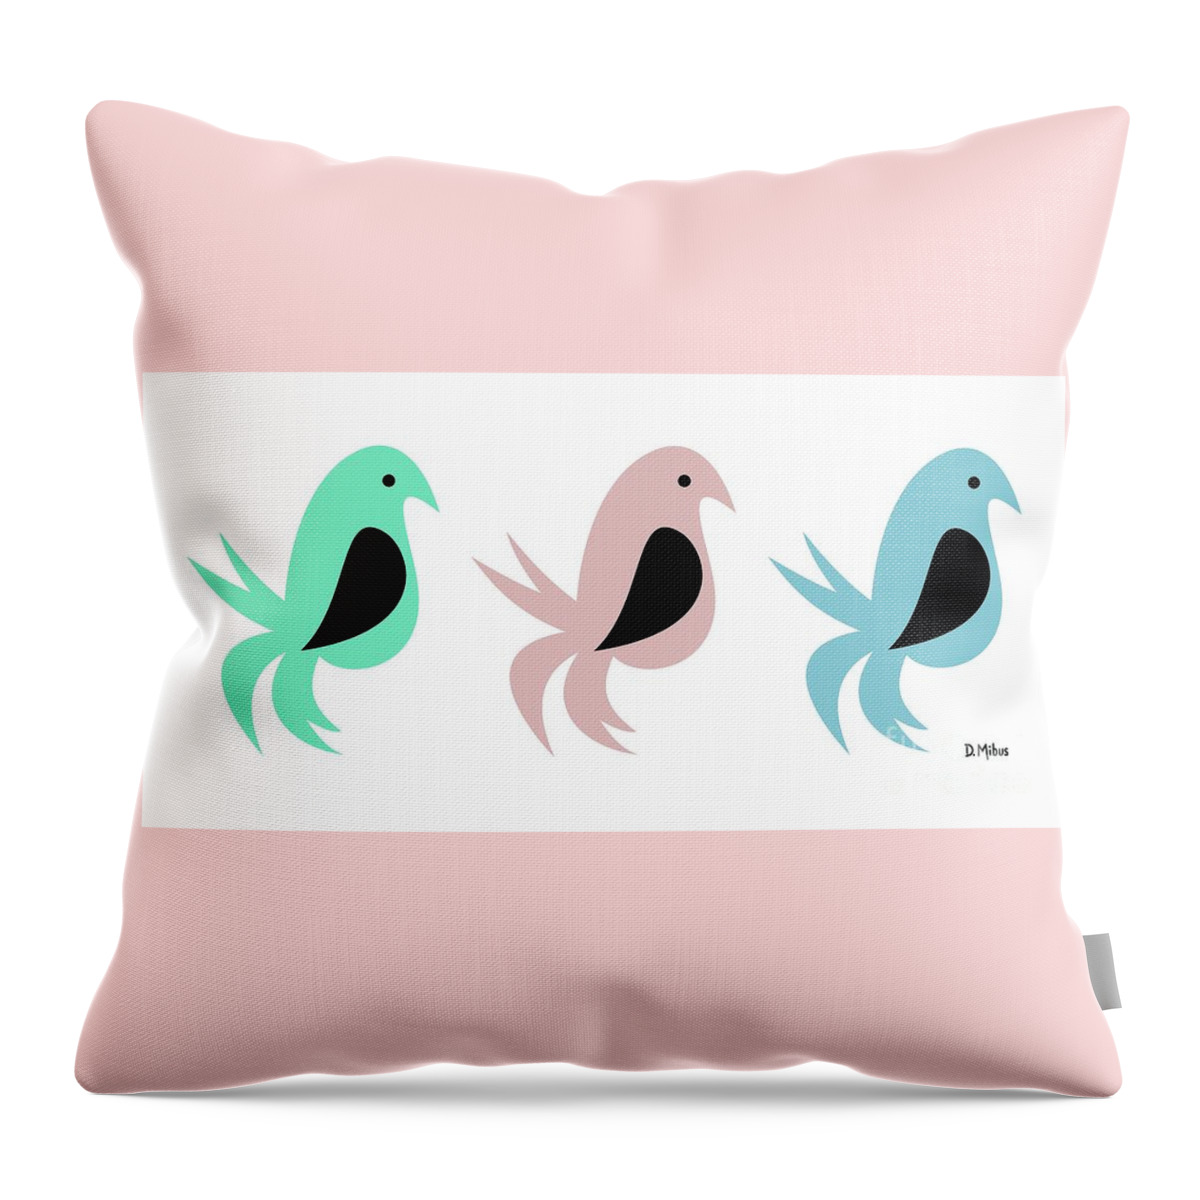 Mid Century Bird Throw Pillow featuring the digital art Trio of Whimsical Birds by Donna Mibus